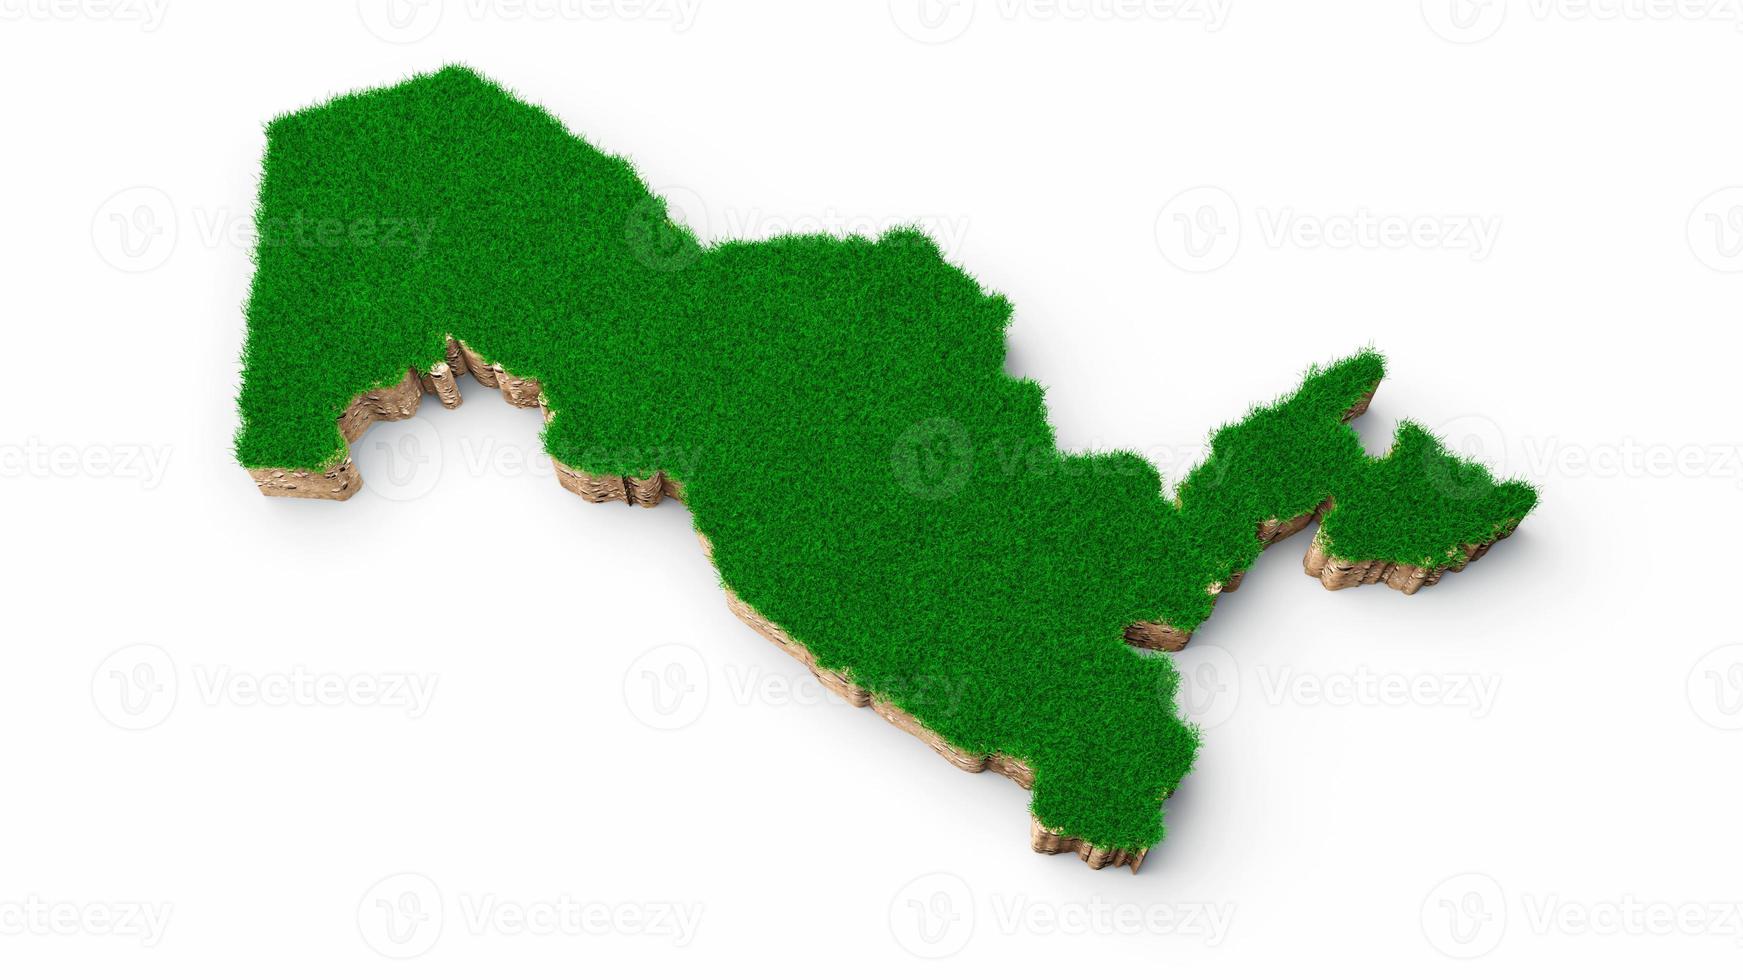 Uzbekistan Map soil land geology cross section with green grass and Rock ground texture 3d illustration photo